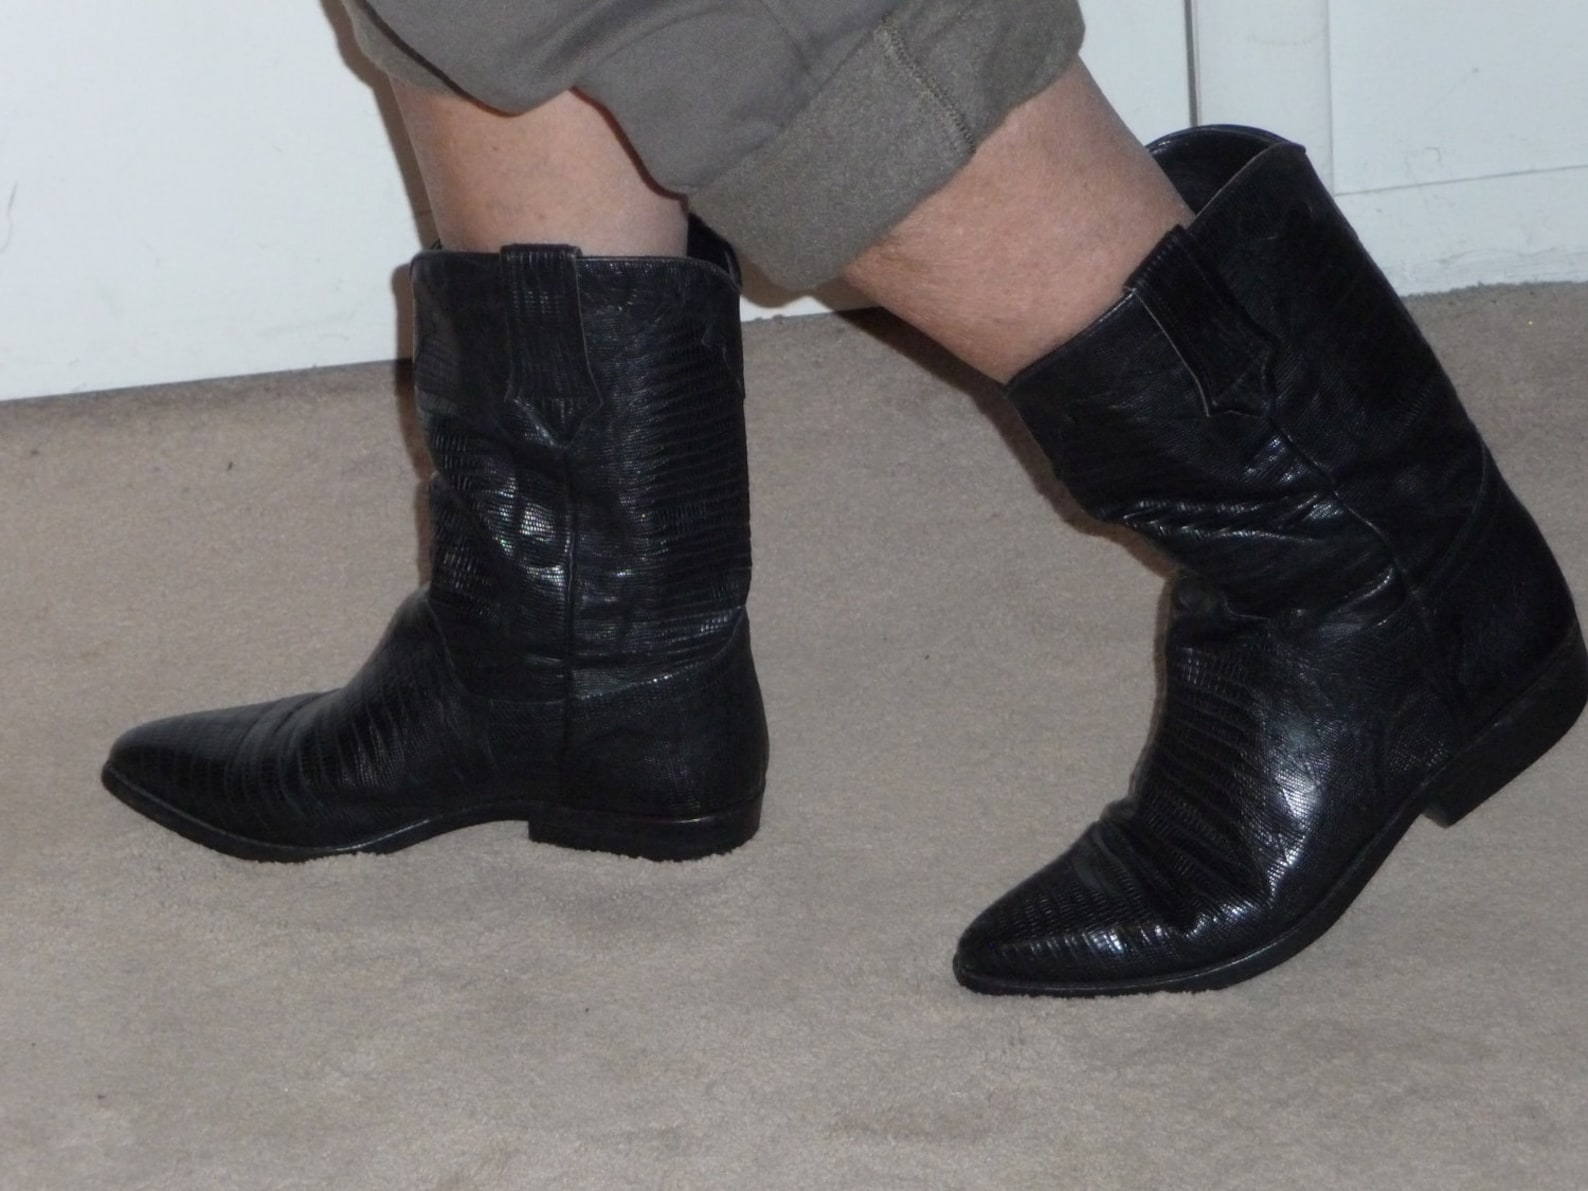 Cowboy Boots in Black Lizard Look Made in Franceprice - Etsy UK